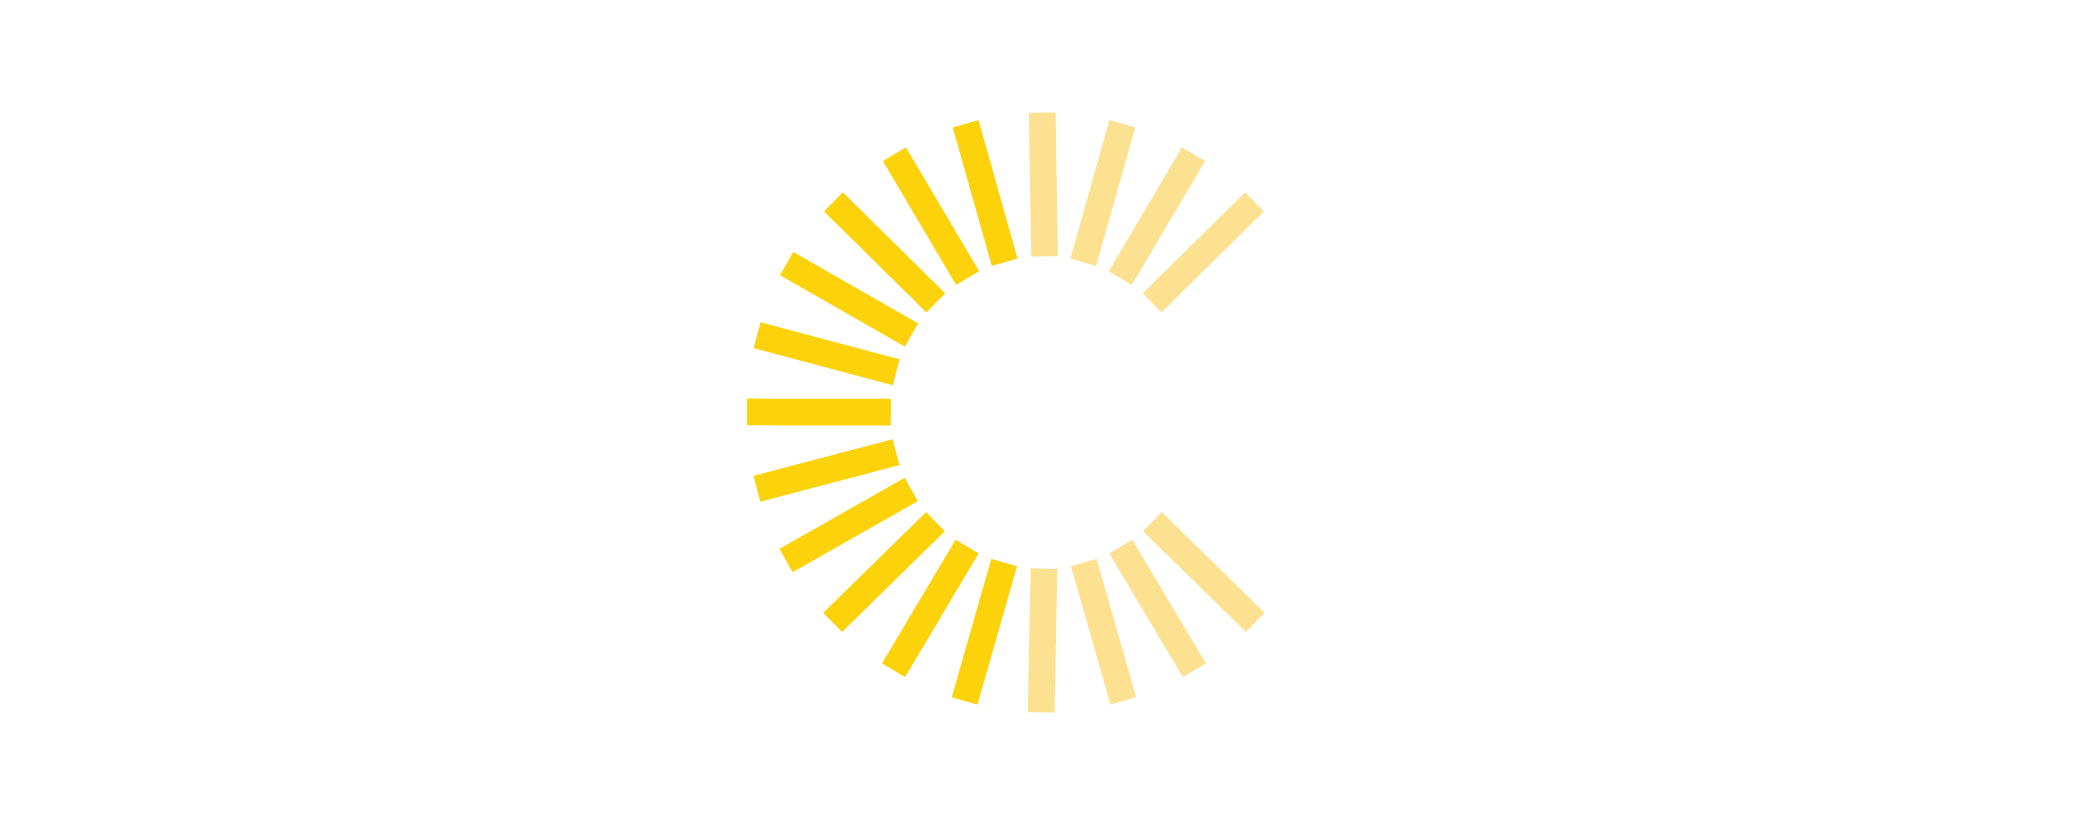  Lux Labs